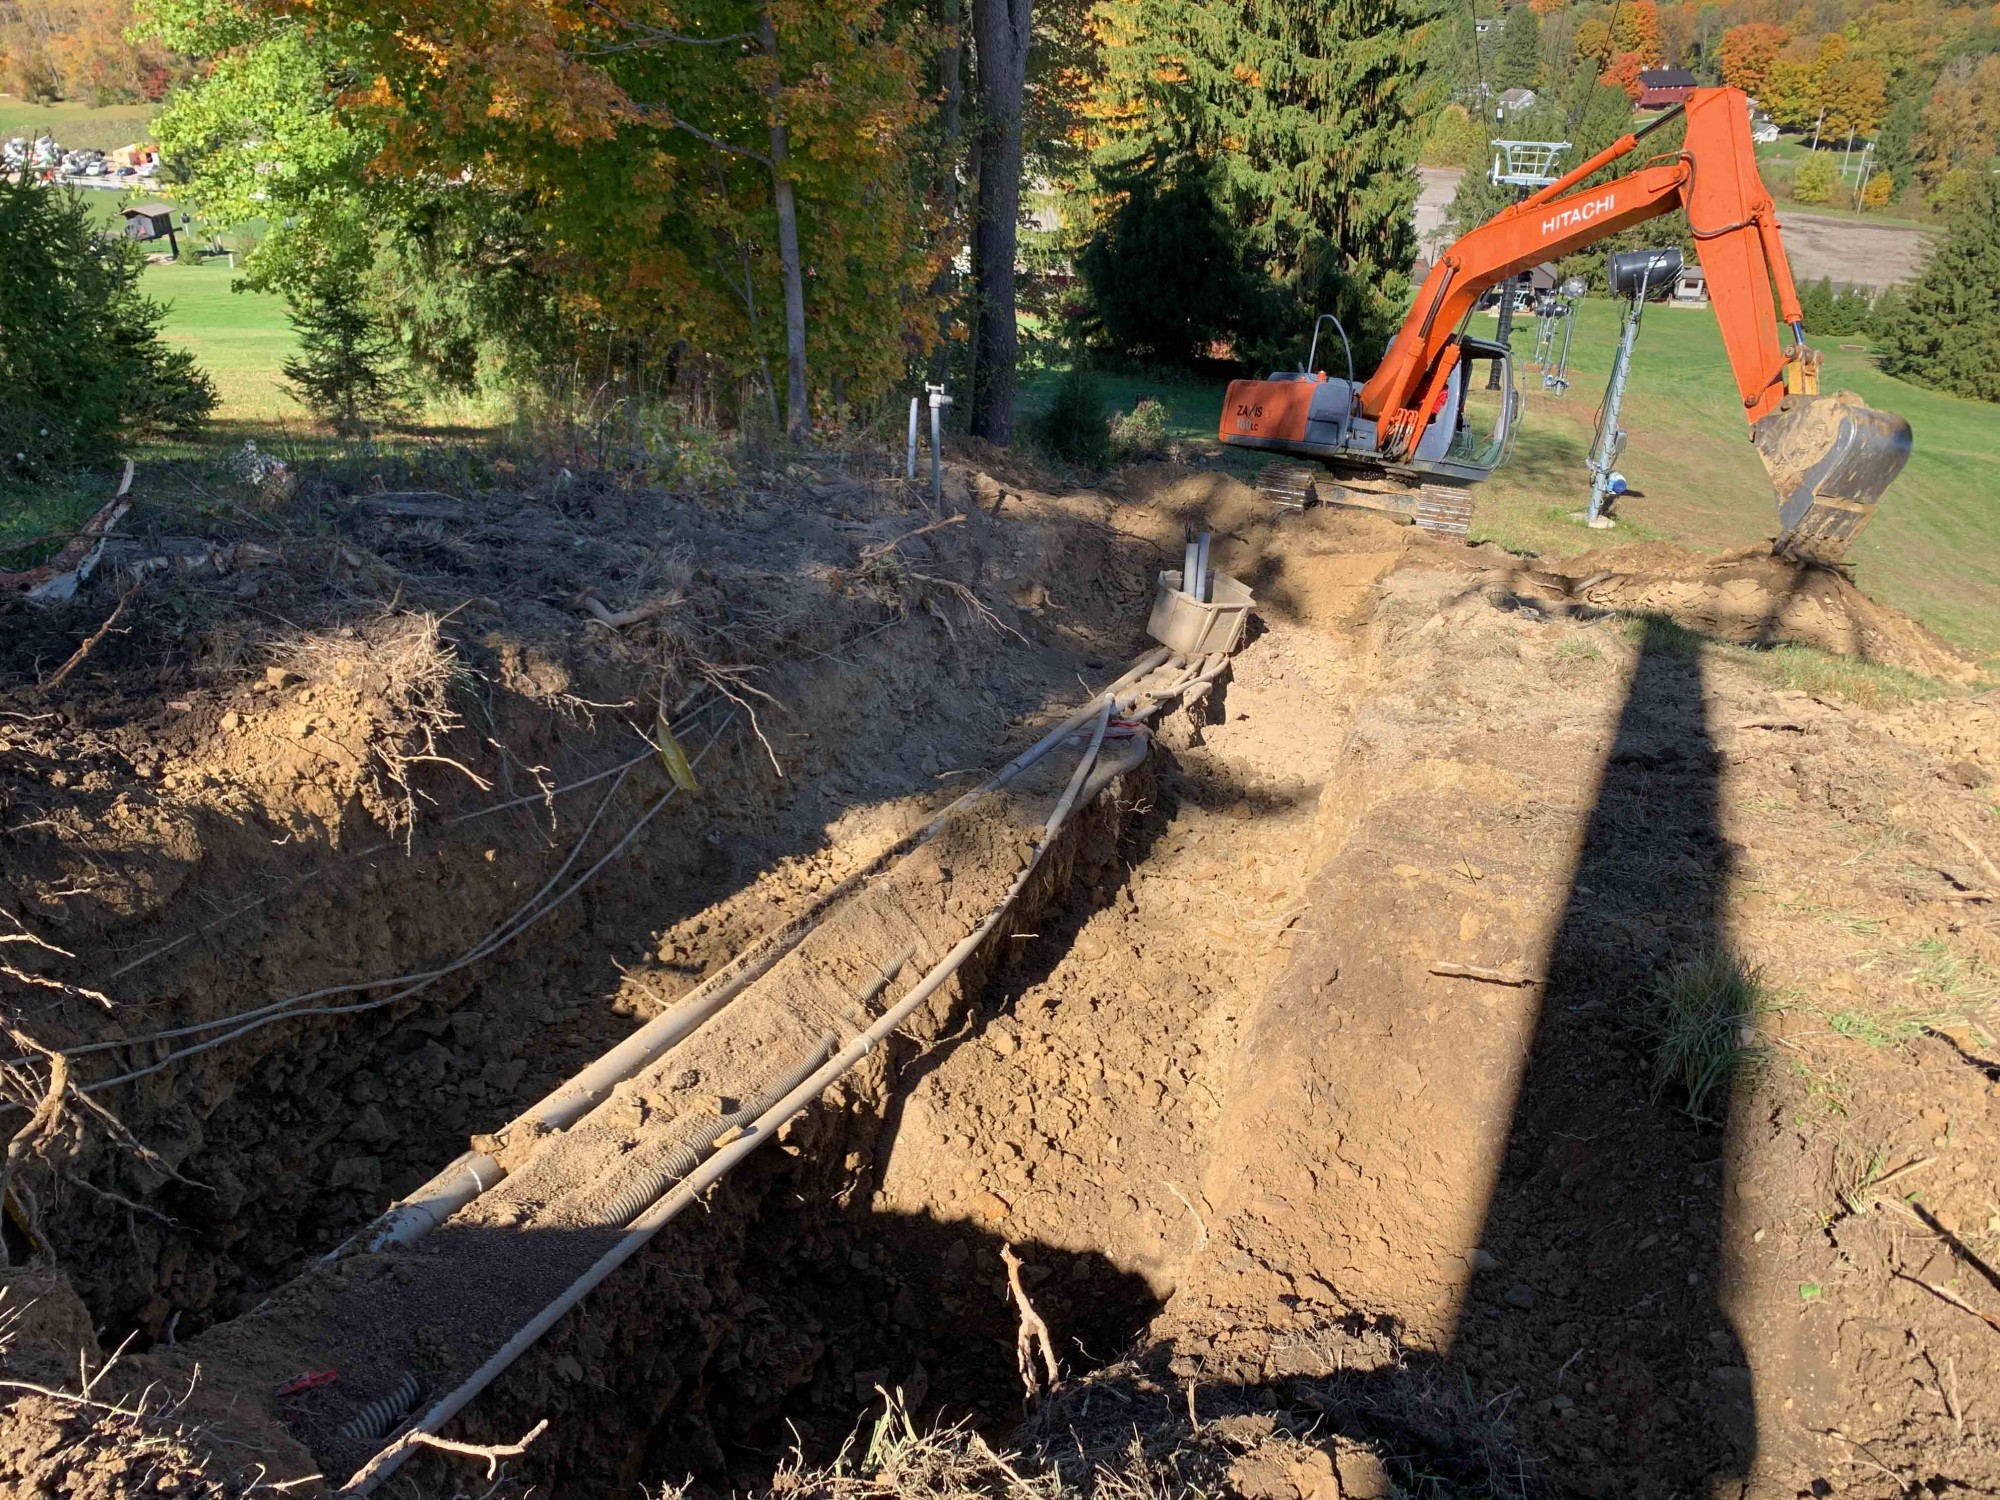 Upgrading Snowmaking Waterline On Competition Slope Snow Trails 20-21